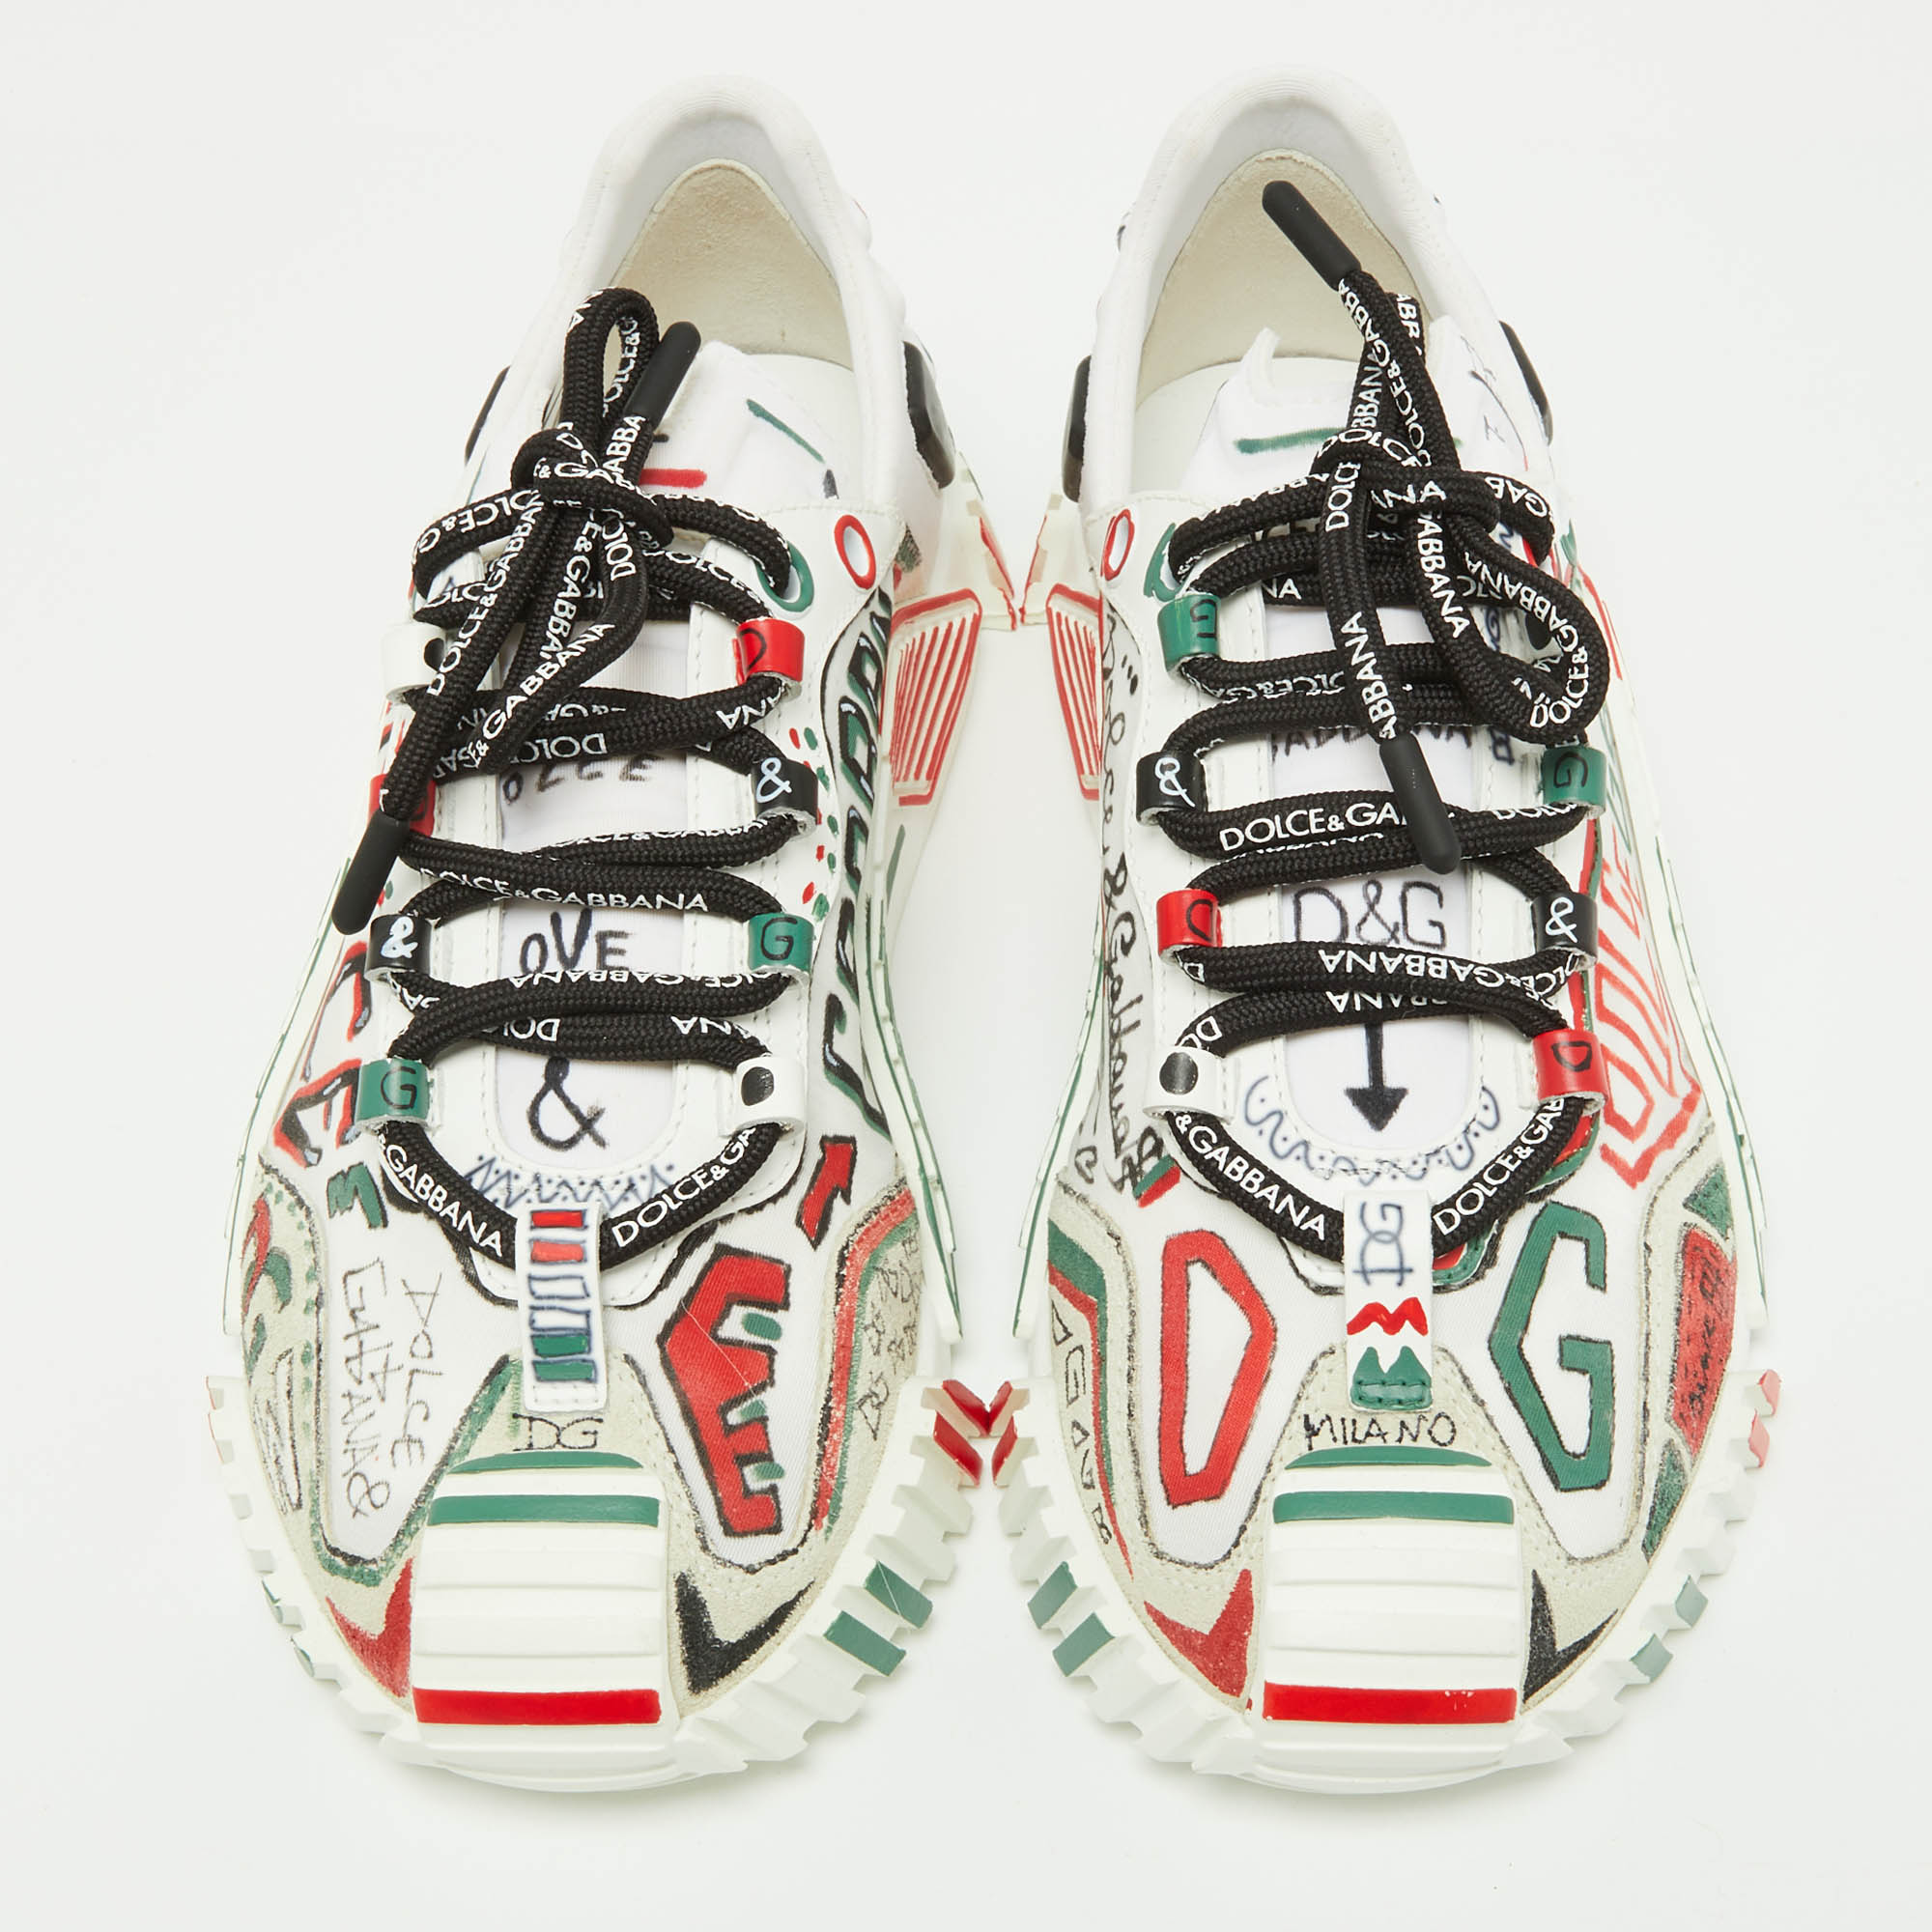 Dolce & Gabbana Multicolor Neoprene And Suede Miami Ns1 Low Top Sneakers Size 38